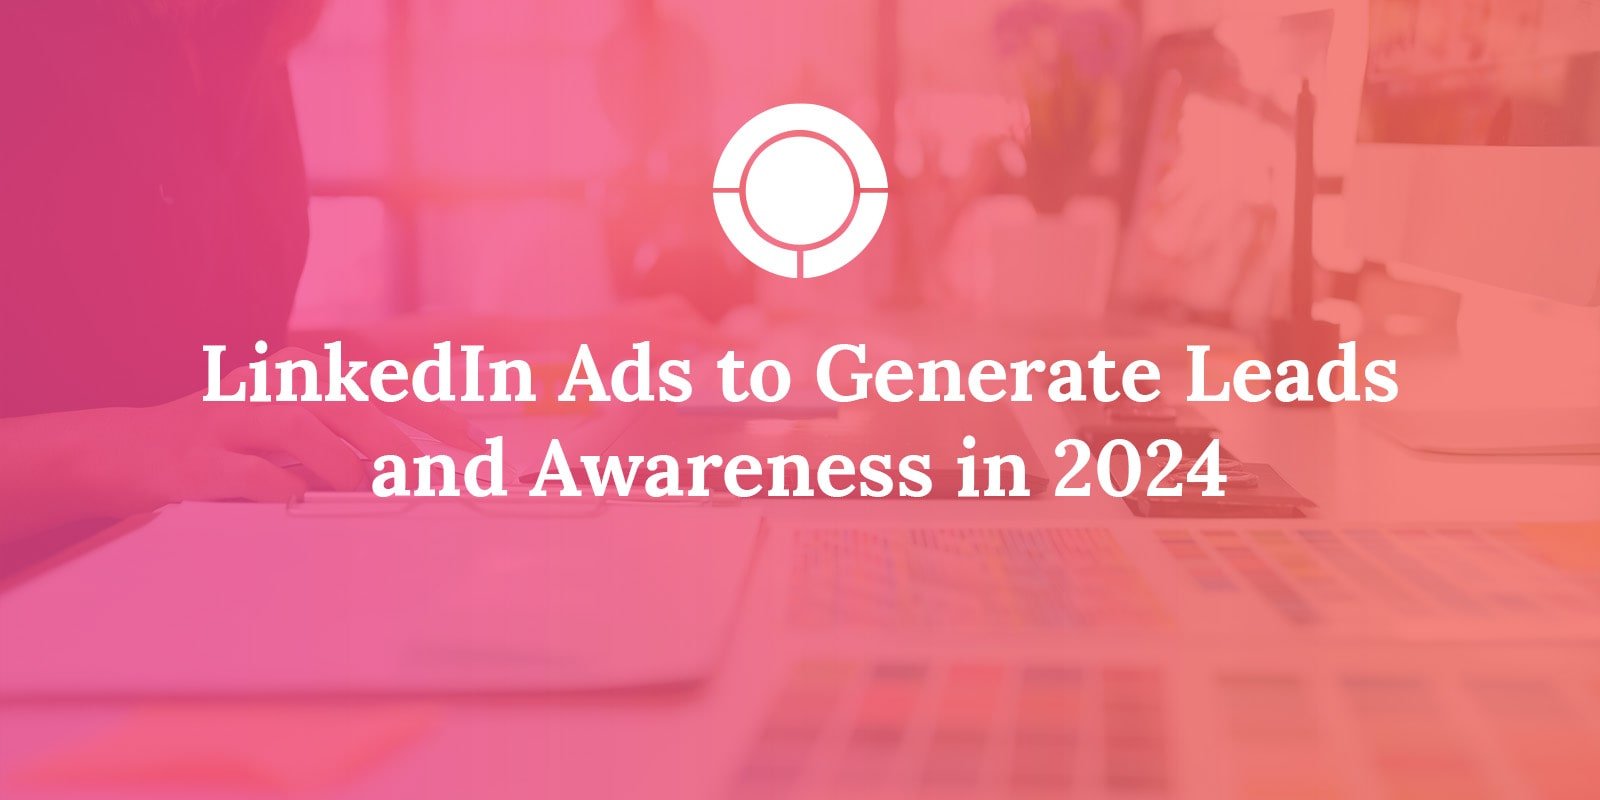 LinkedIn Ads to Generate Leads and Awareness in 2024